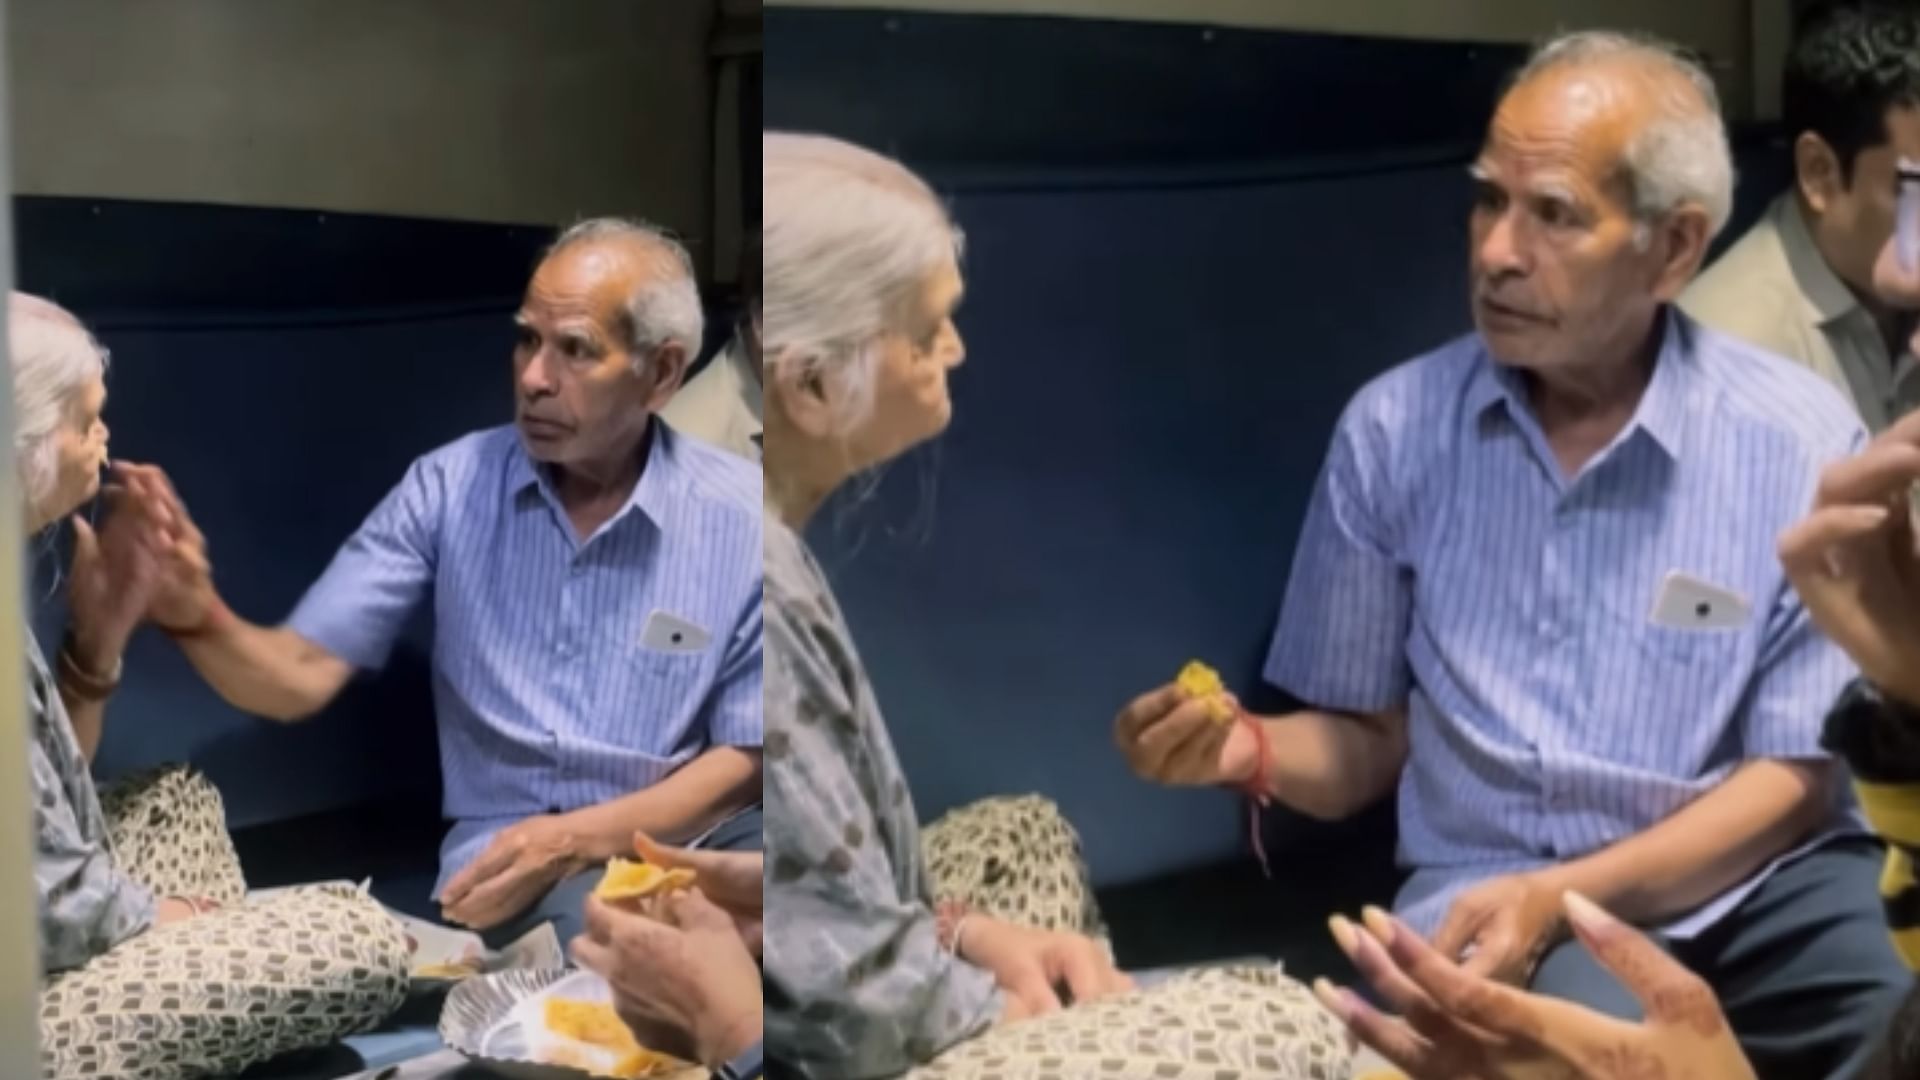 elderly man feeding sick wife with his hands in the train video went viral on social media